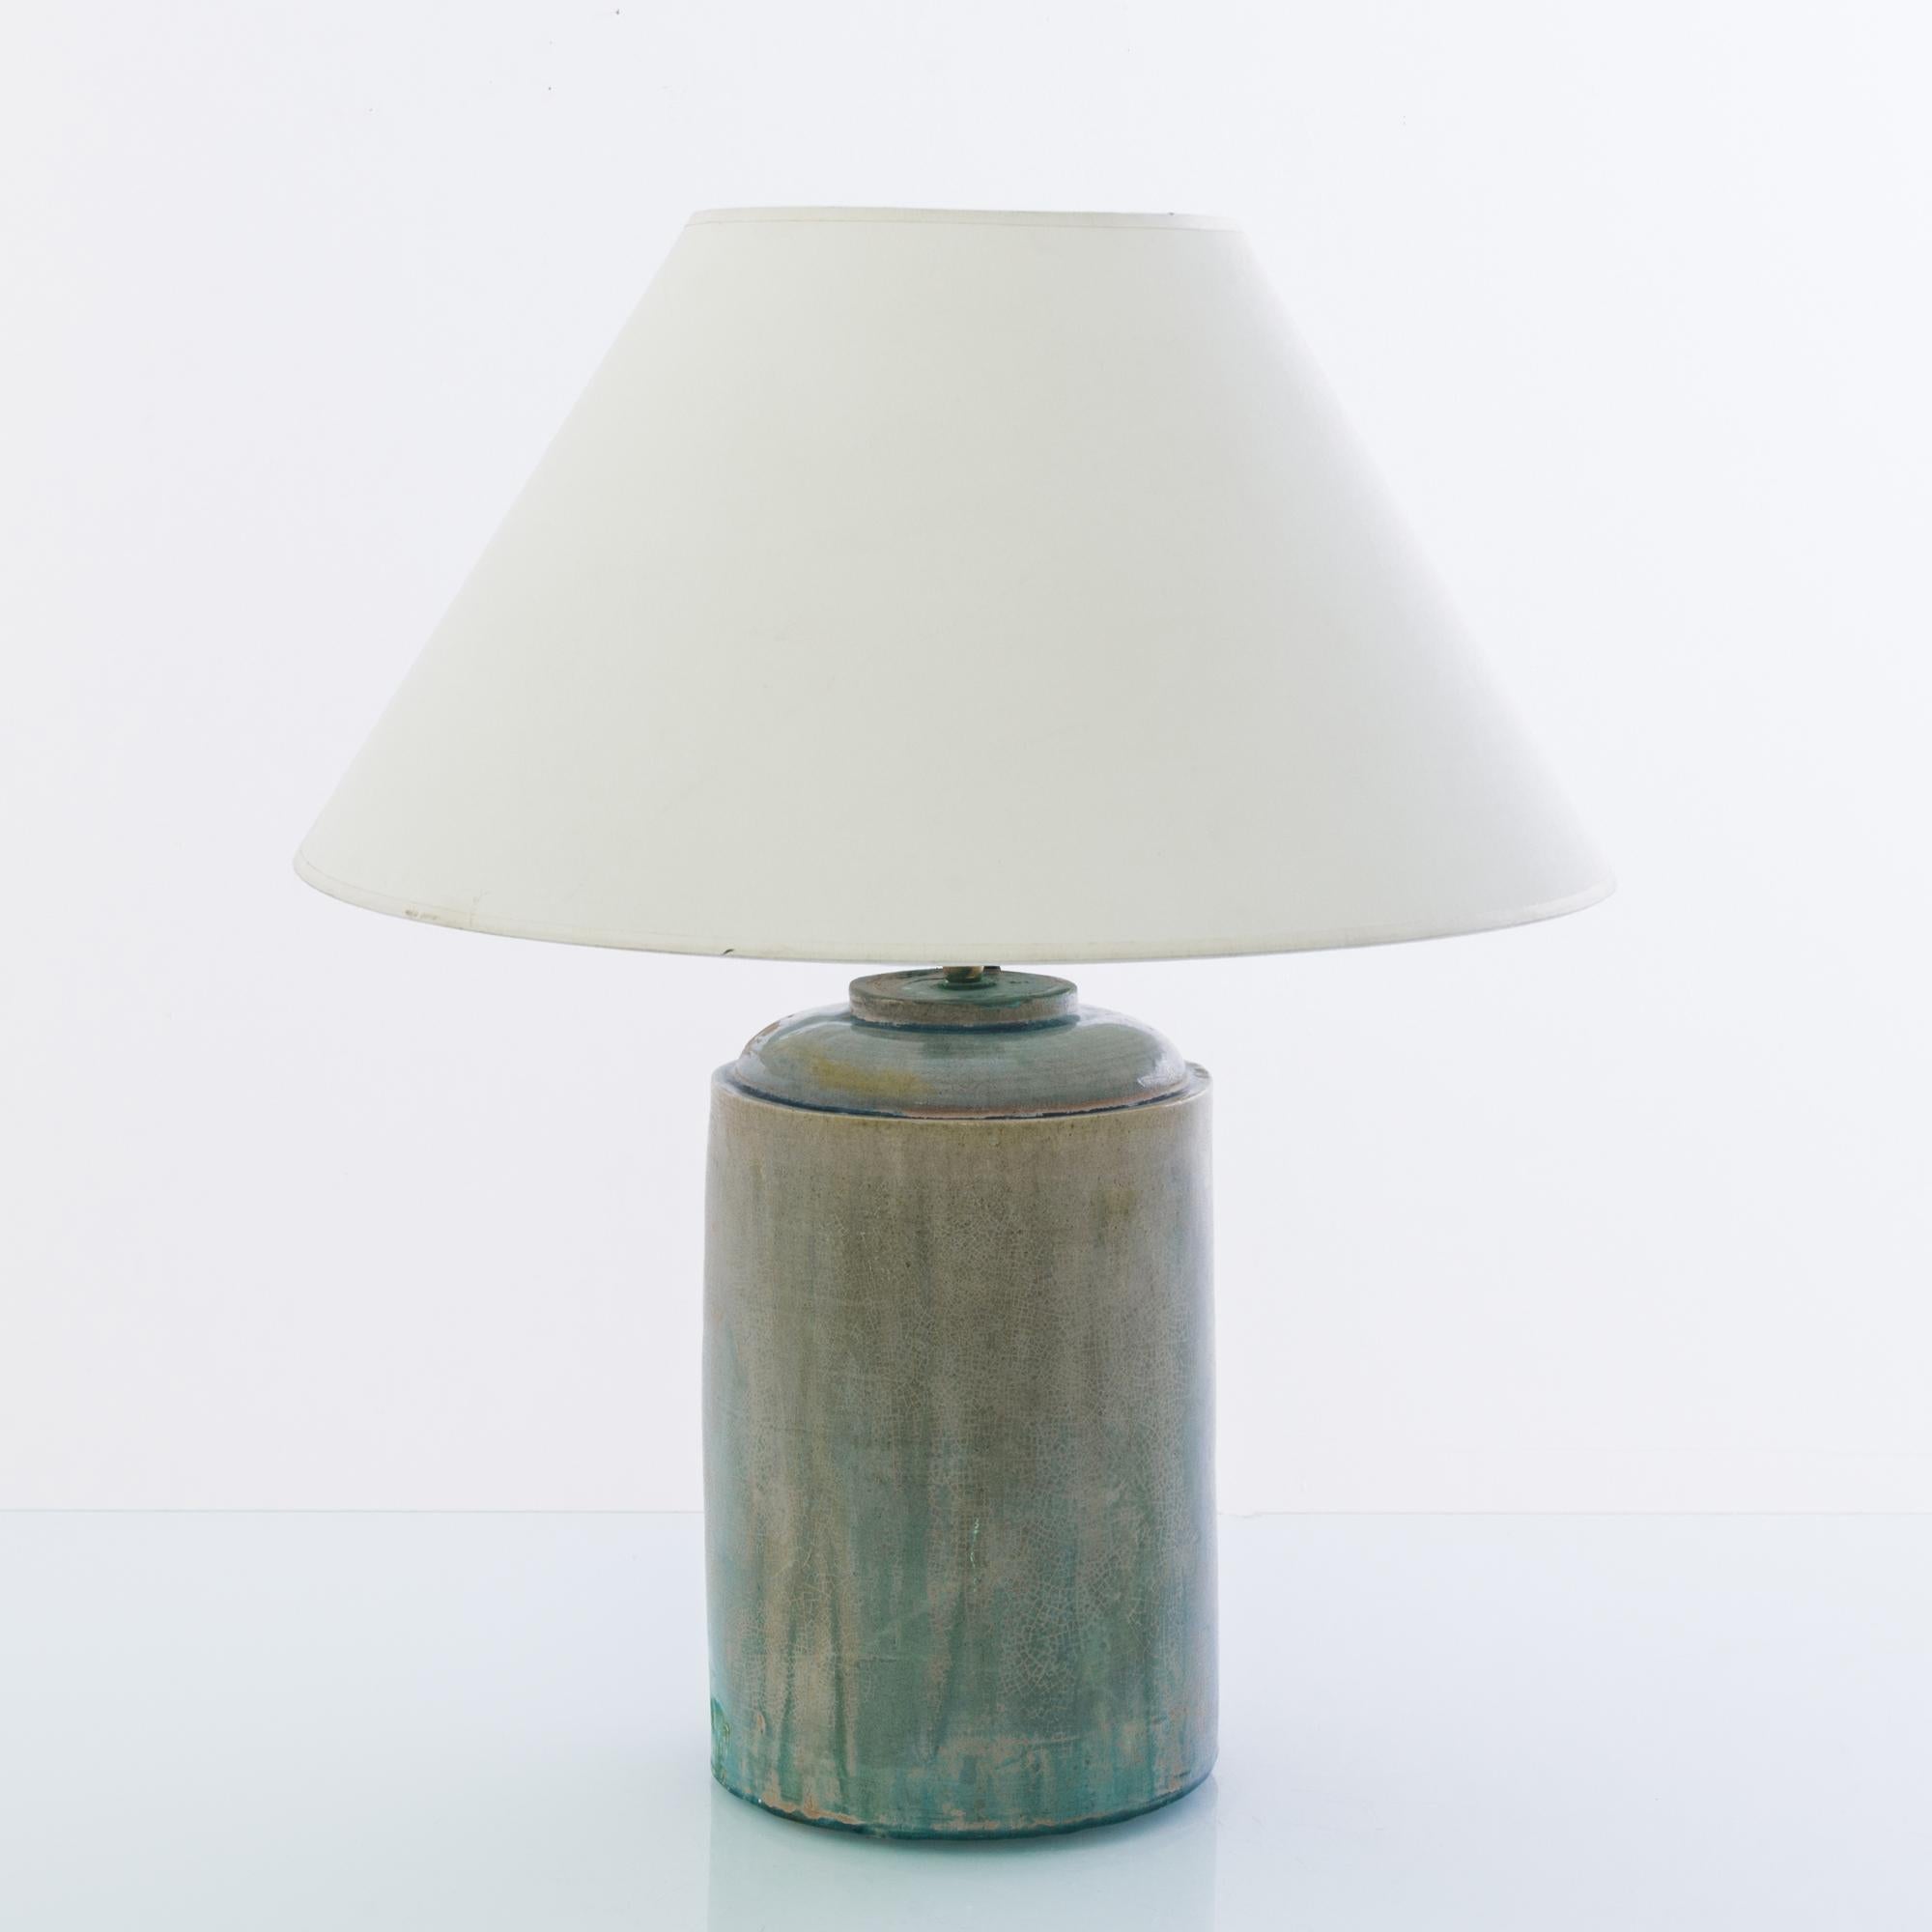 A vintage Chinese vase, fitted with an adjustable brass fixture and E26 lighting socket. The ombre sunset celadon glaze creates a vivid visual impact. Textured glazes, attractive colors and stout shape grants a rustic tactility to the form. Crowned